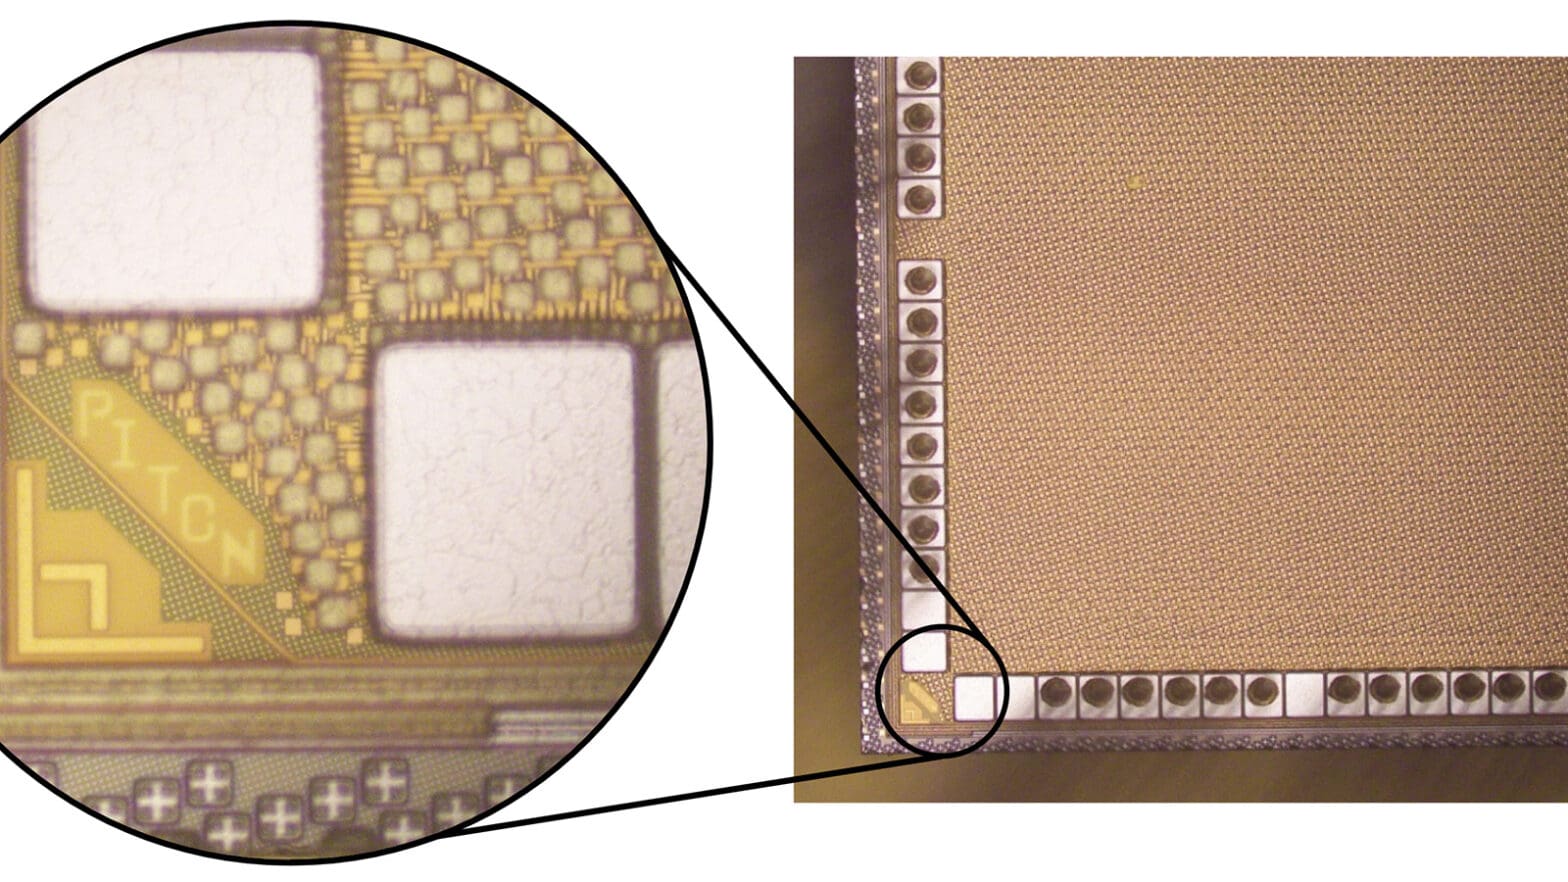 Microscope image of computer chip